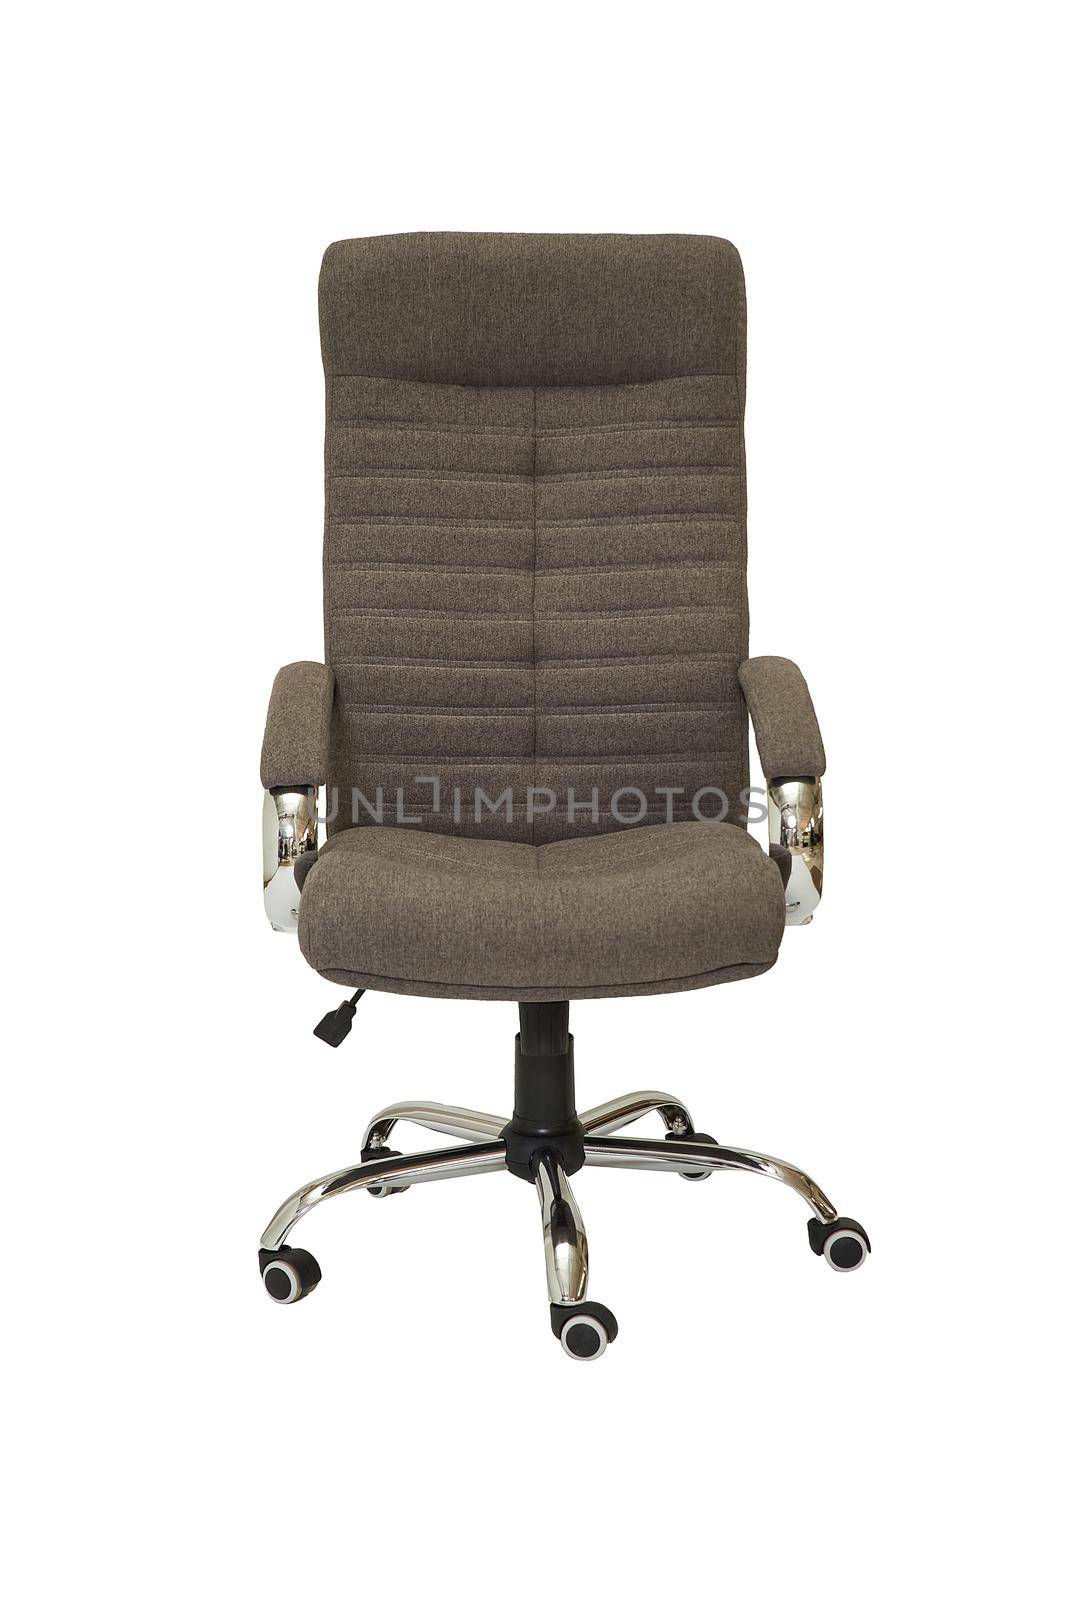 grey fabric office armchair on wheels isolated on white background. front view